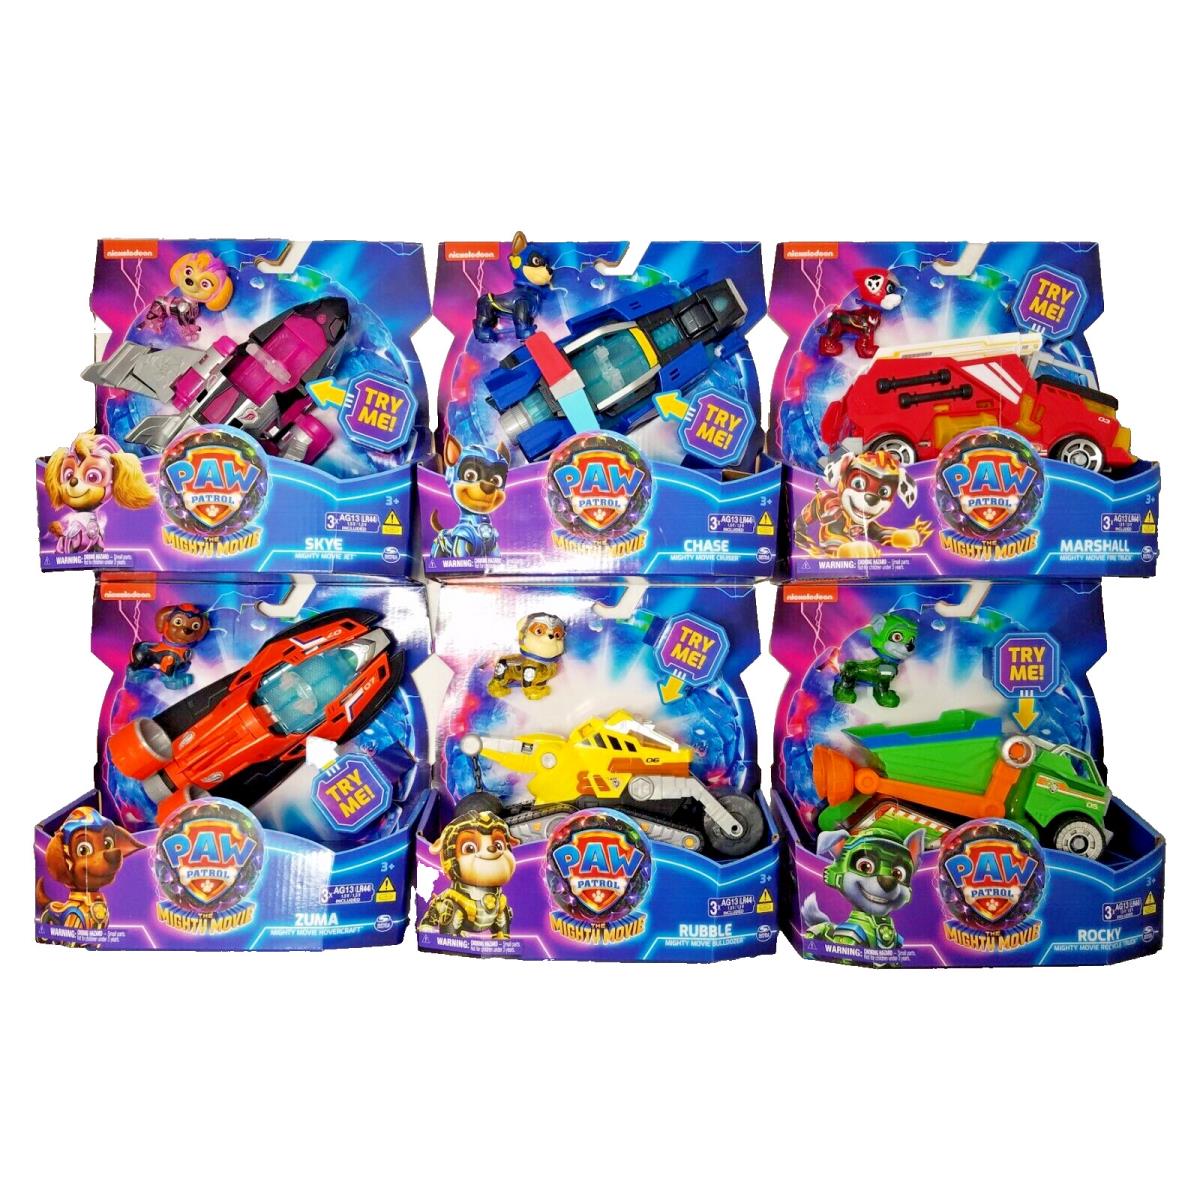 Paw Patrol The Mighty Movie Action Figure Vehicle Set of 6 Lights and Sounds